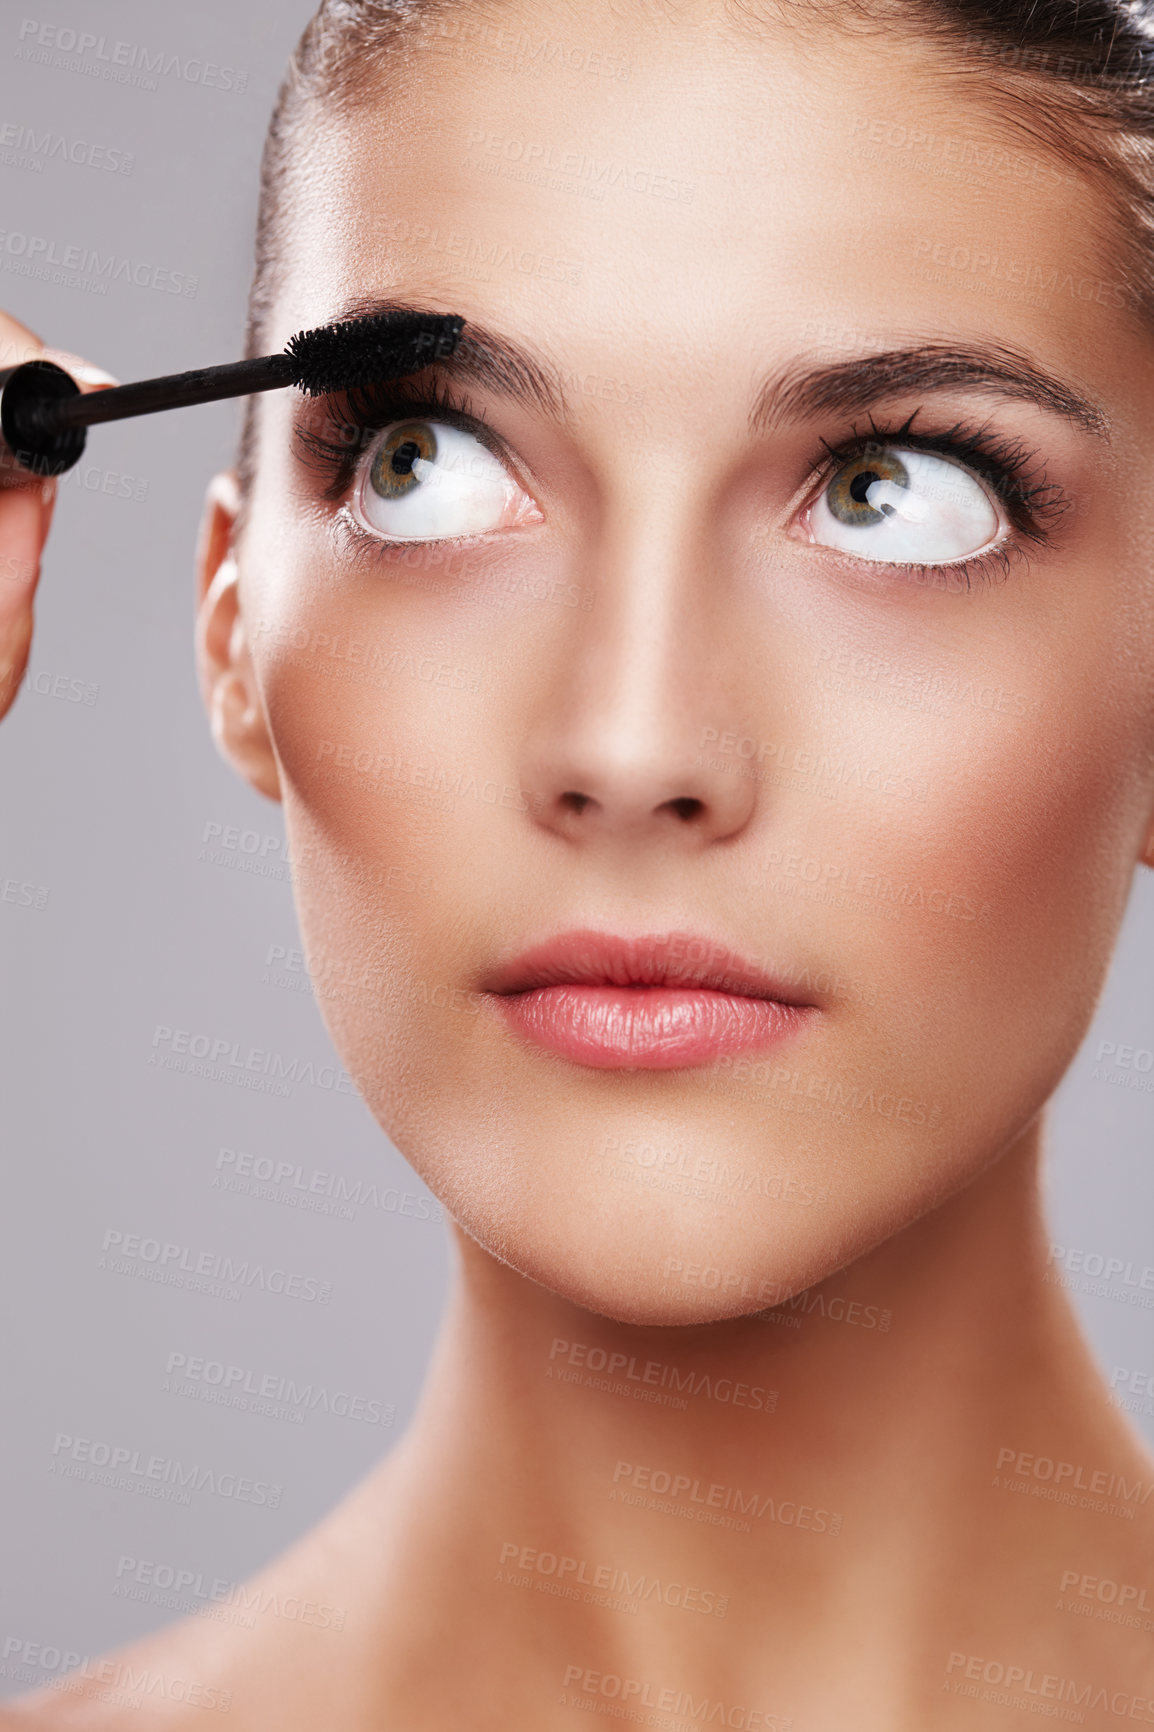 Buy stock photo Studio shot of a beautiful young woman applying makeup  against a gray background